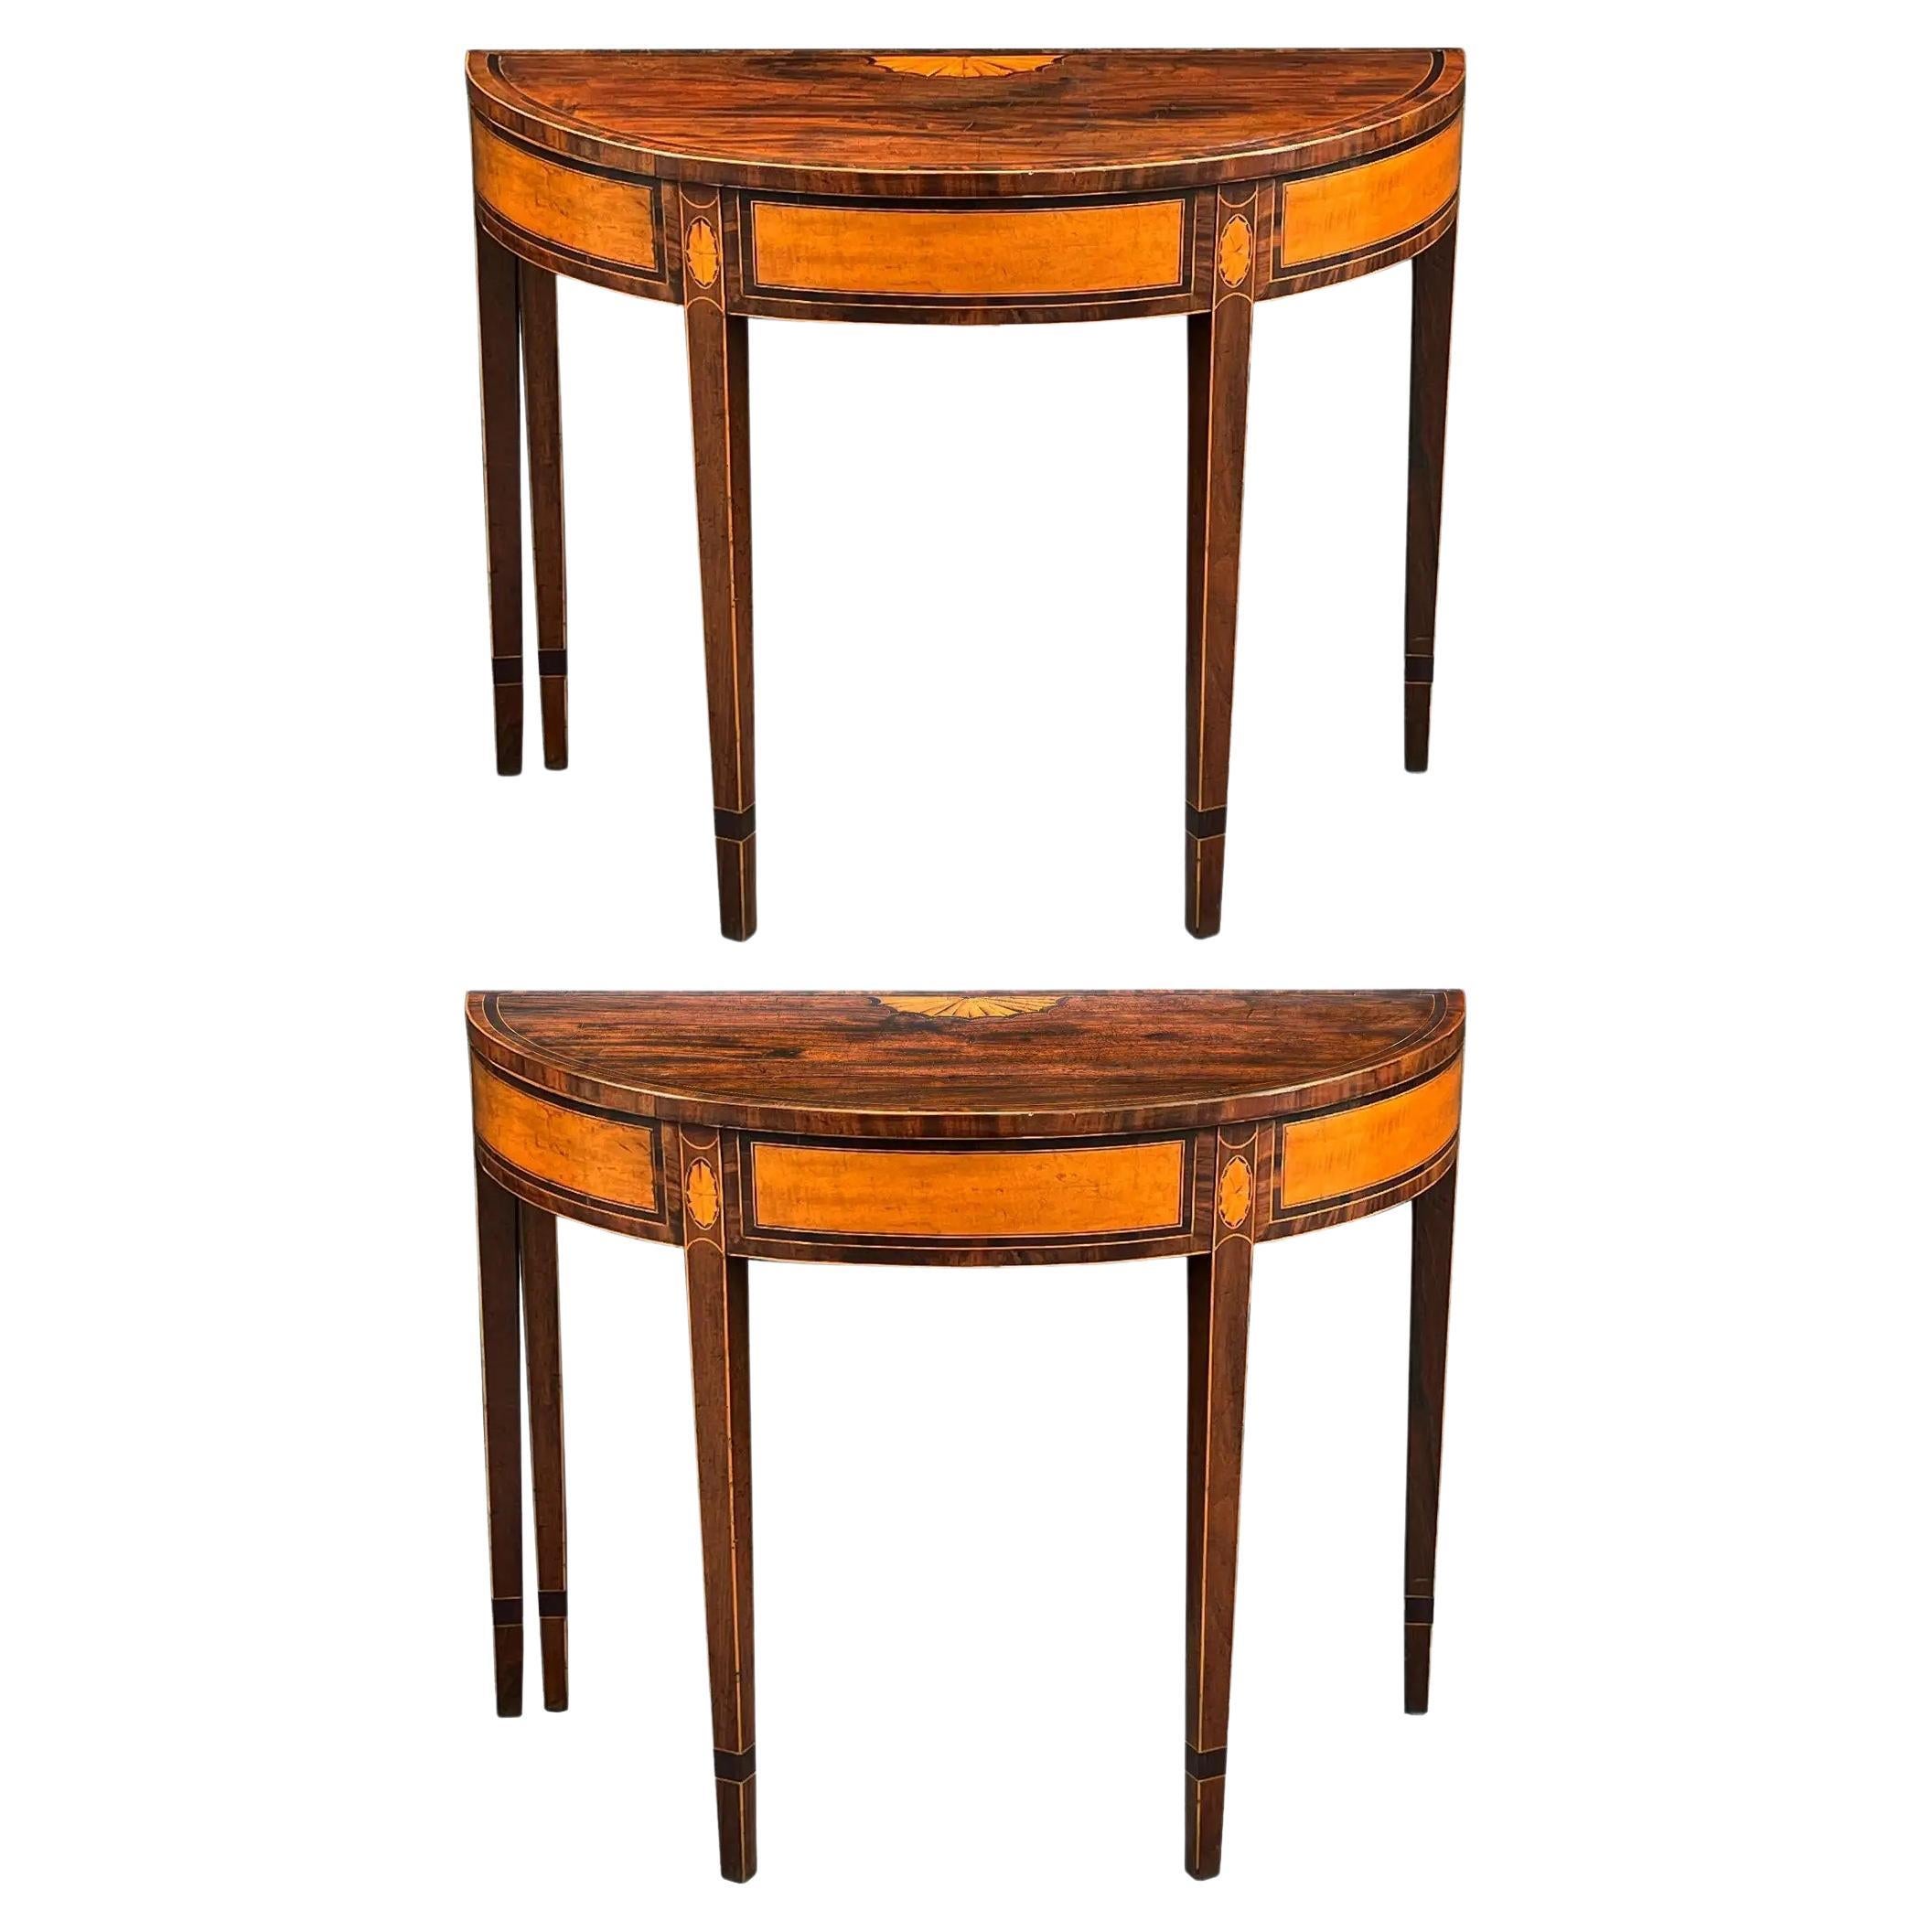 Pair of 18th Century George III Mahogany and Satinwood Inlaid Card Tables